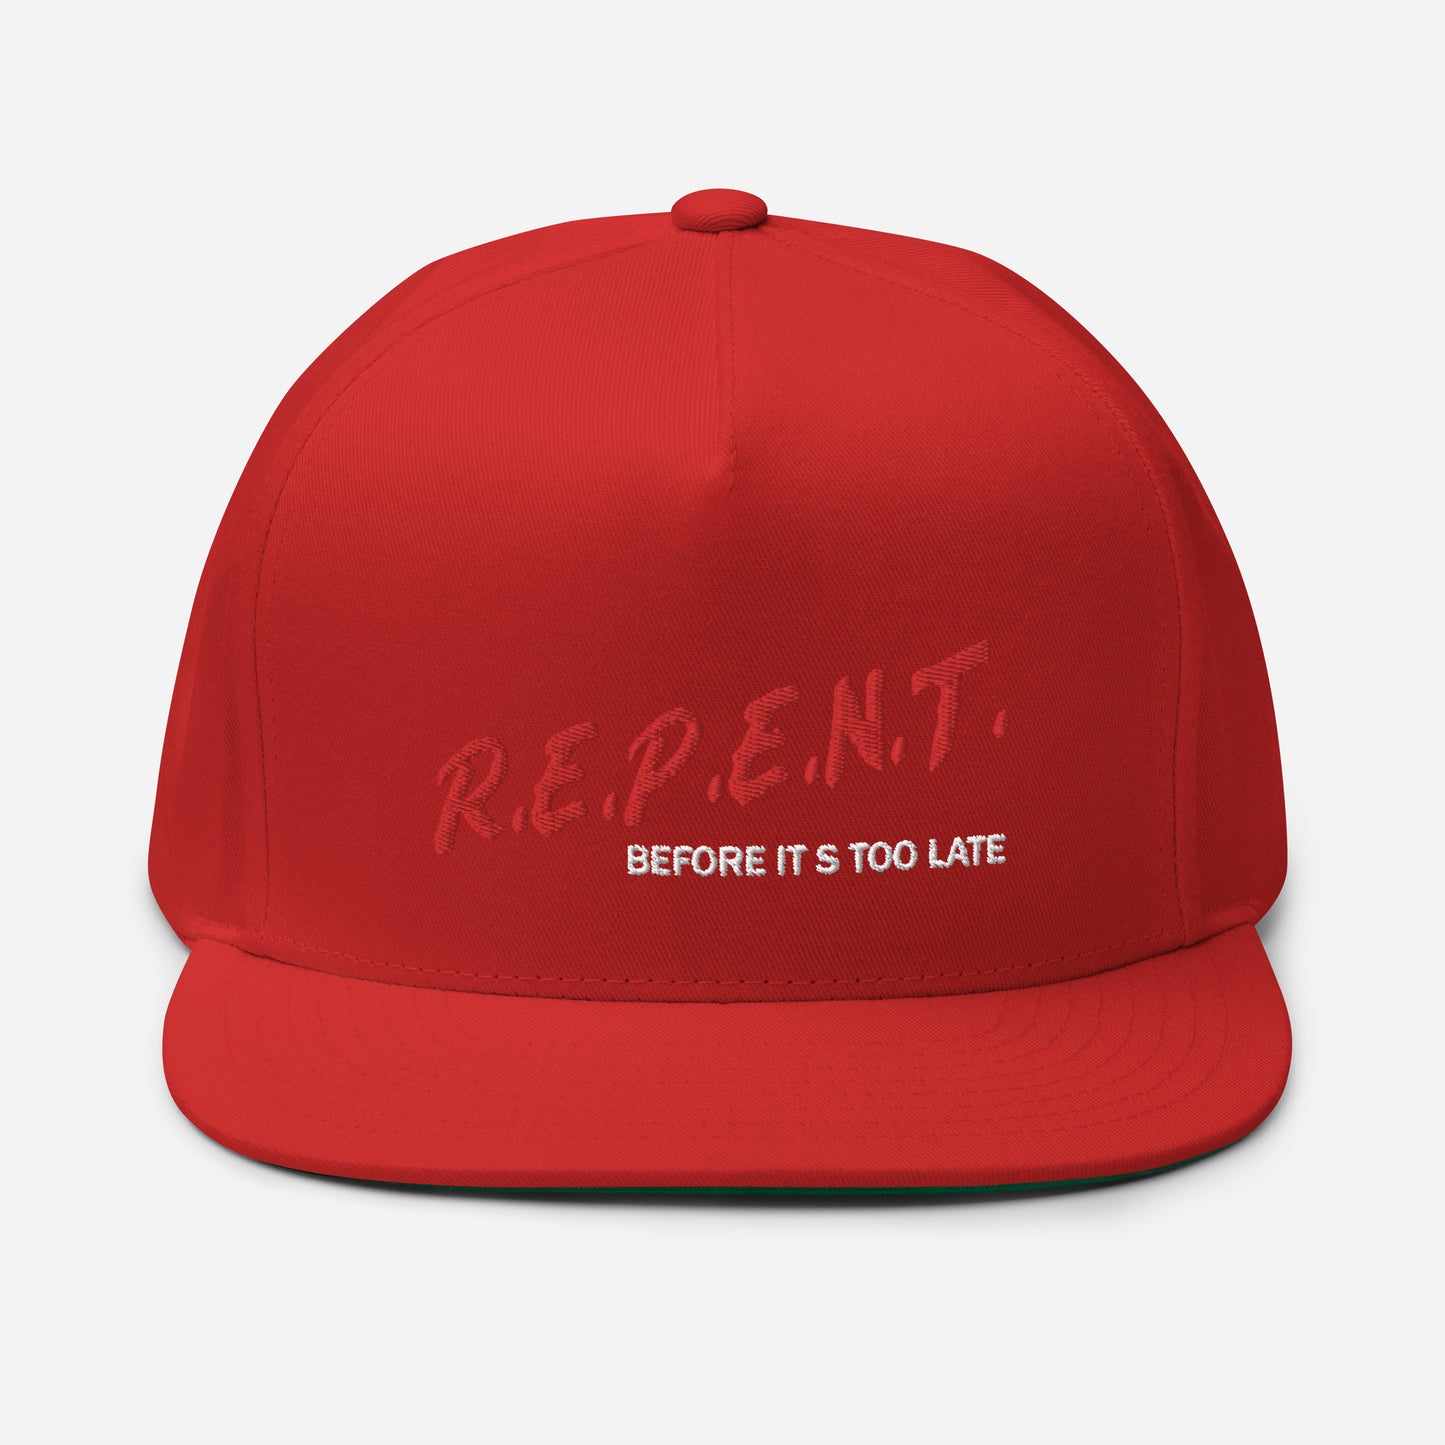 Repent...Before It's To Late Flat Bill Cap